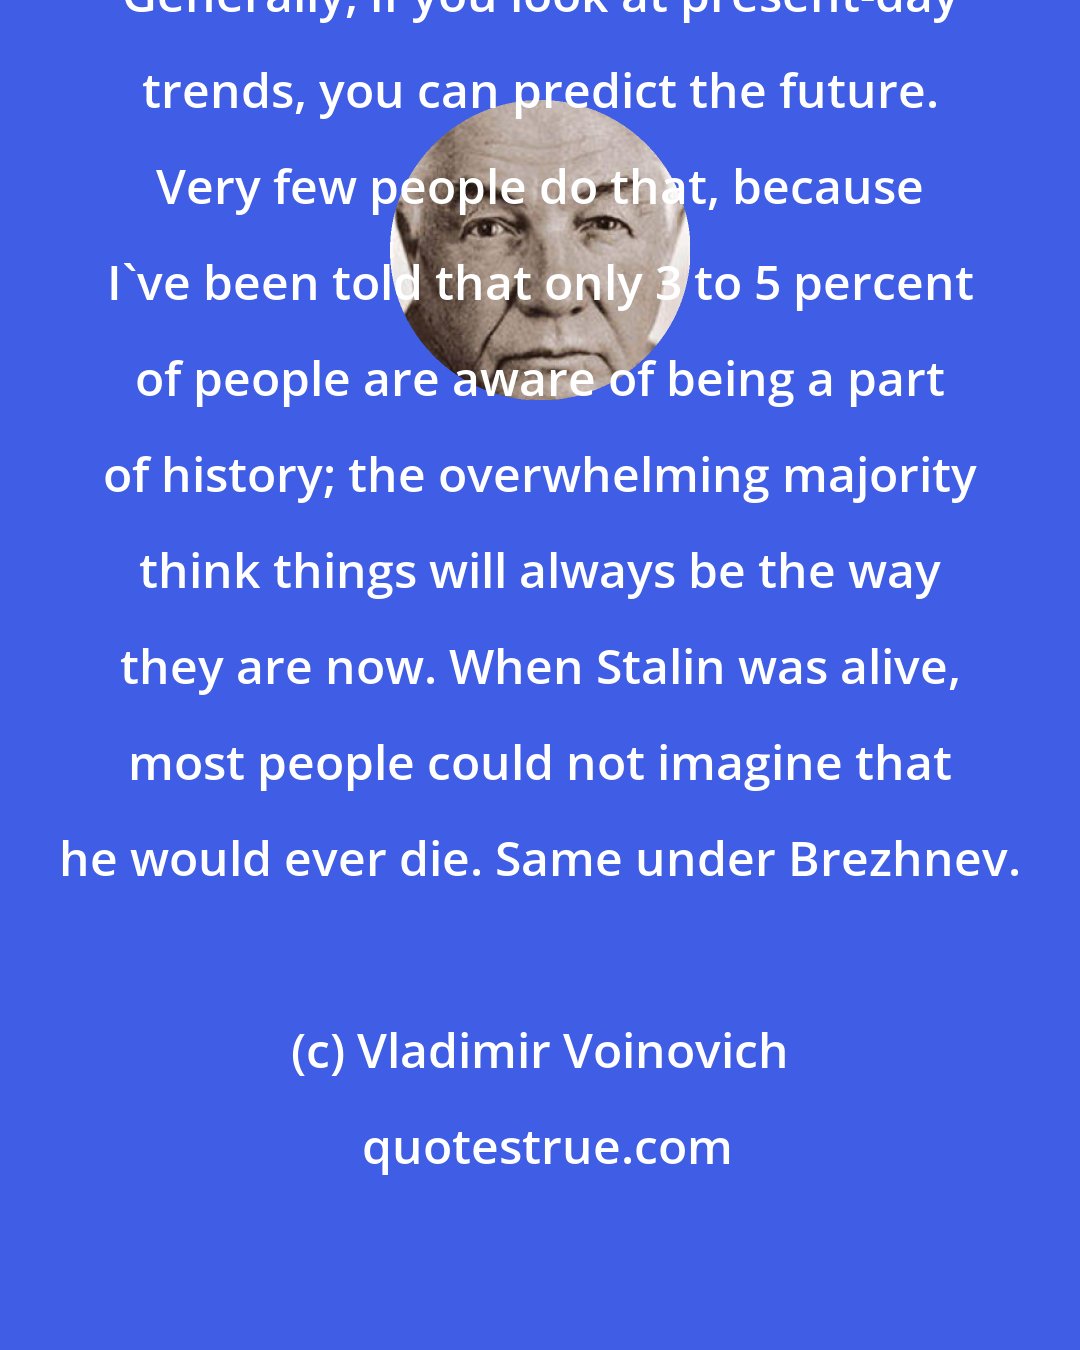 Vladimir Voinovich: Generally, if you look at present-day trends, you can predict the future. Very few people do that, because I've been told that only 3 to 5 percent of people are aware of being a part of history; the overwhelming majority think things will always be the way they are now. When Stalin was alive, most people could not imagine that he would ever die. Same under Brezhnev.